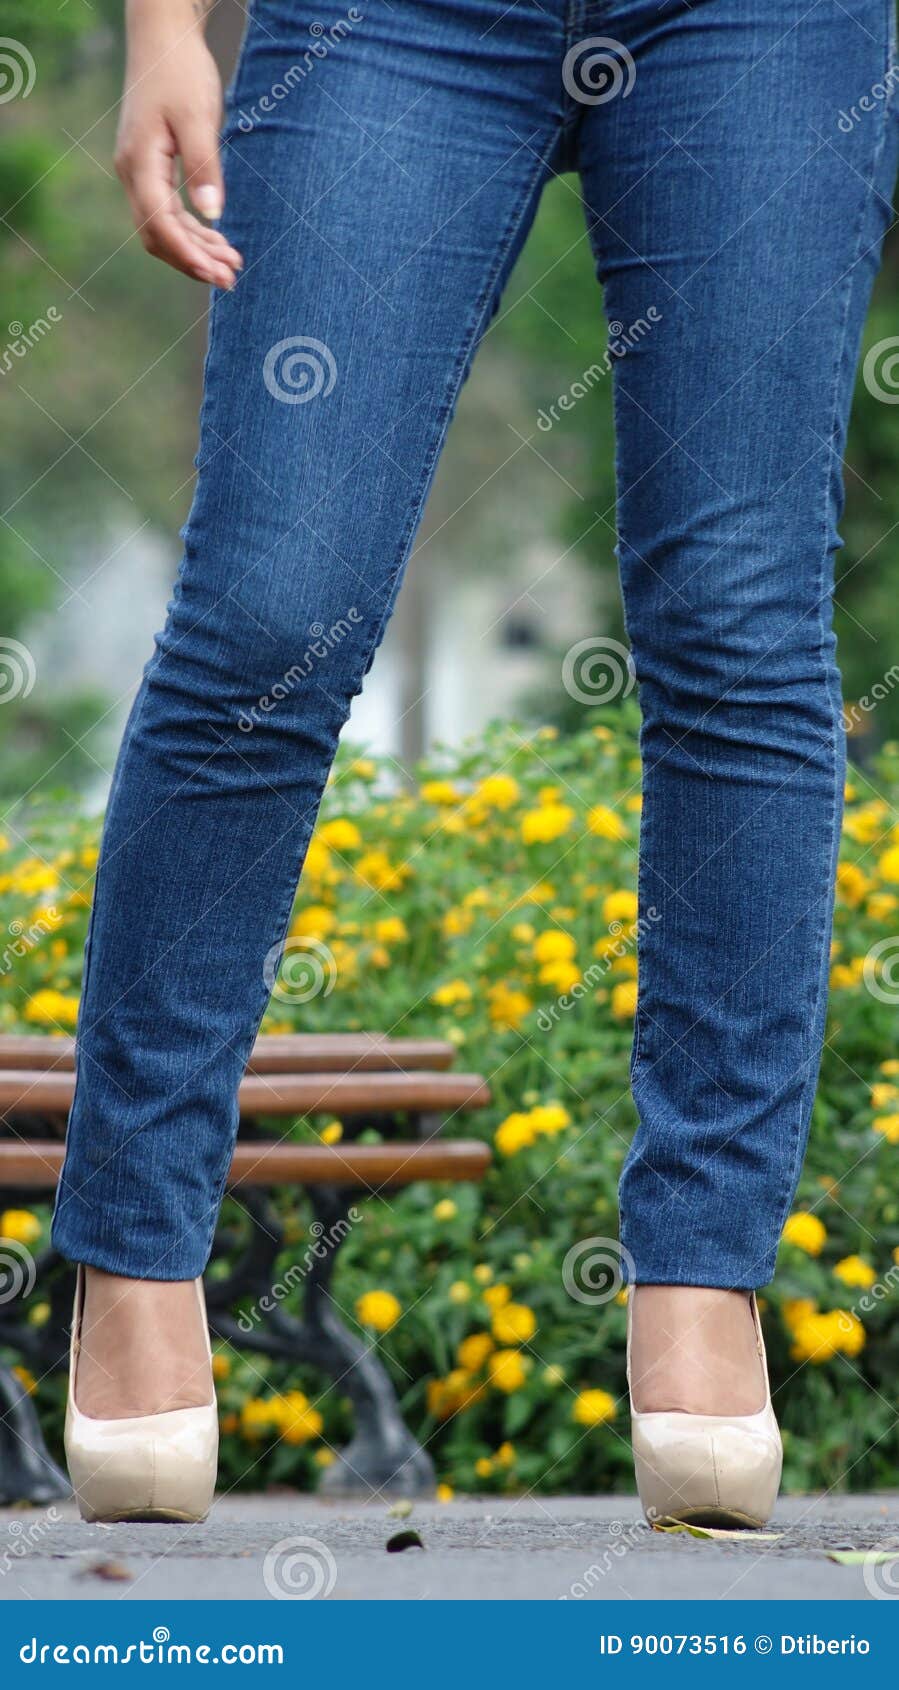 Female Legs Blue Jeans and High Heels Stock Photo - Image of blue ...